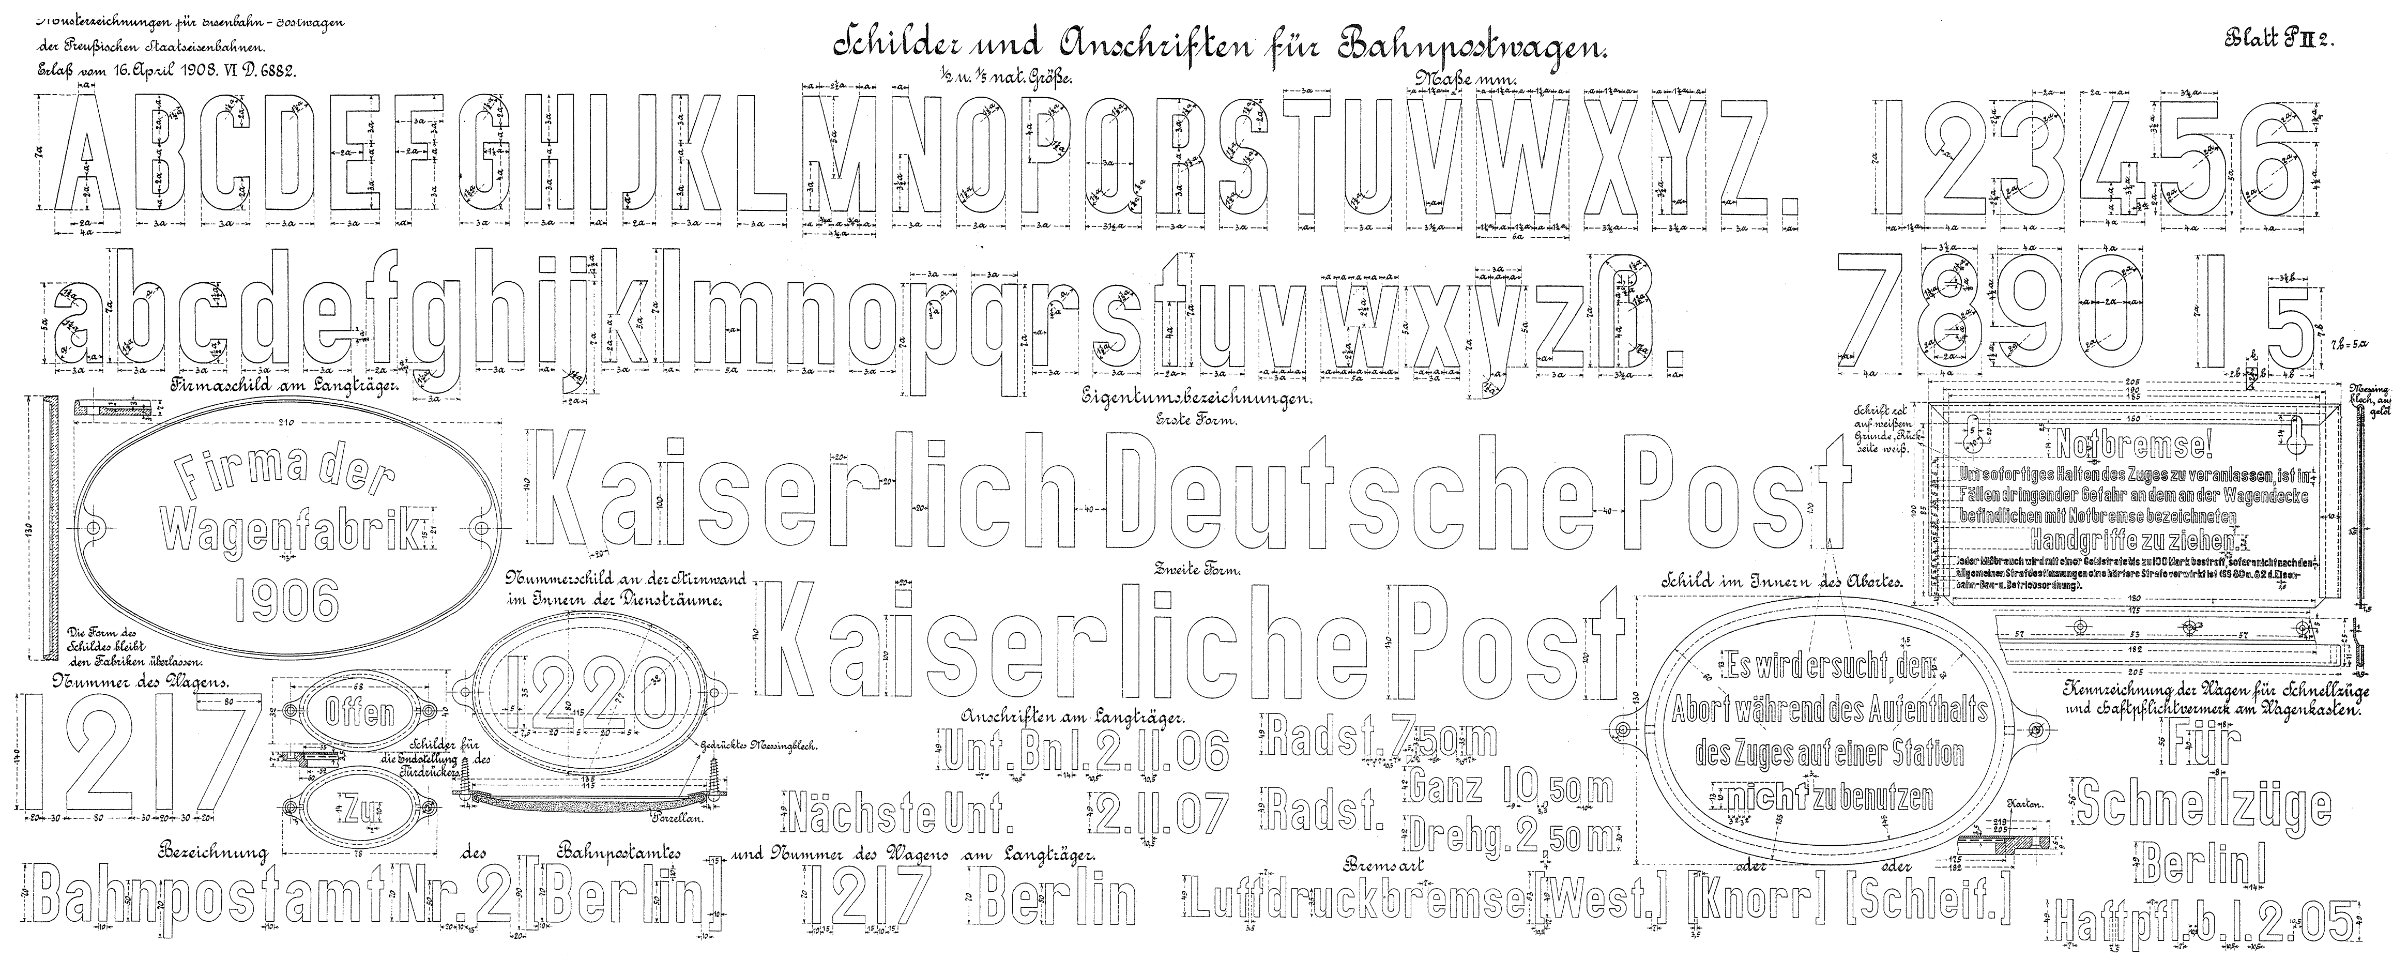 Sample sheet from Royal Prussian Railway Administration